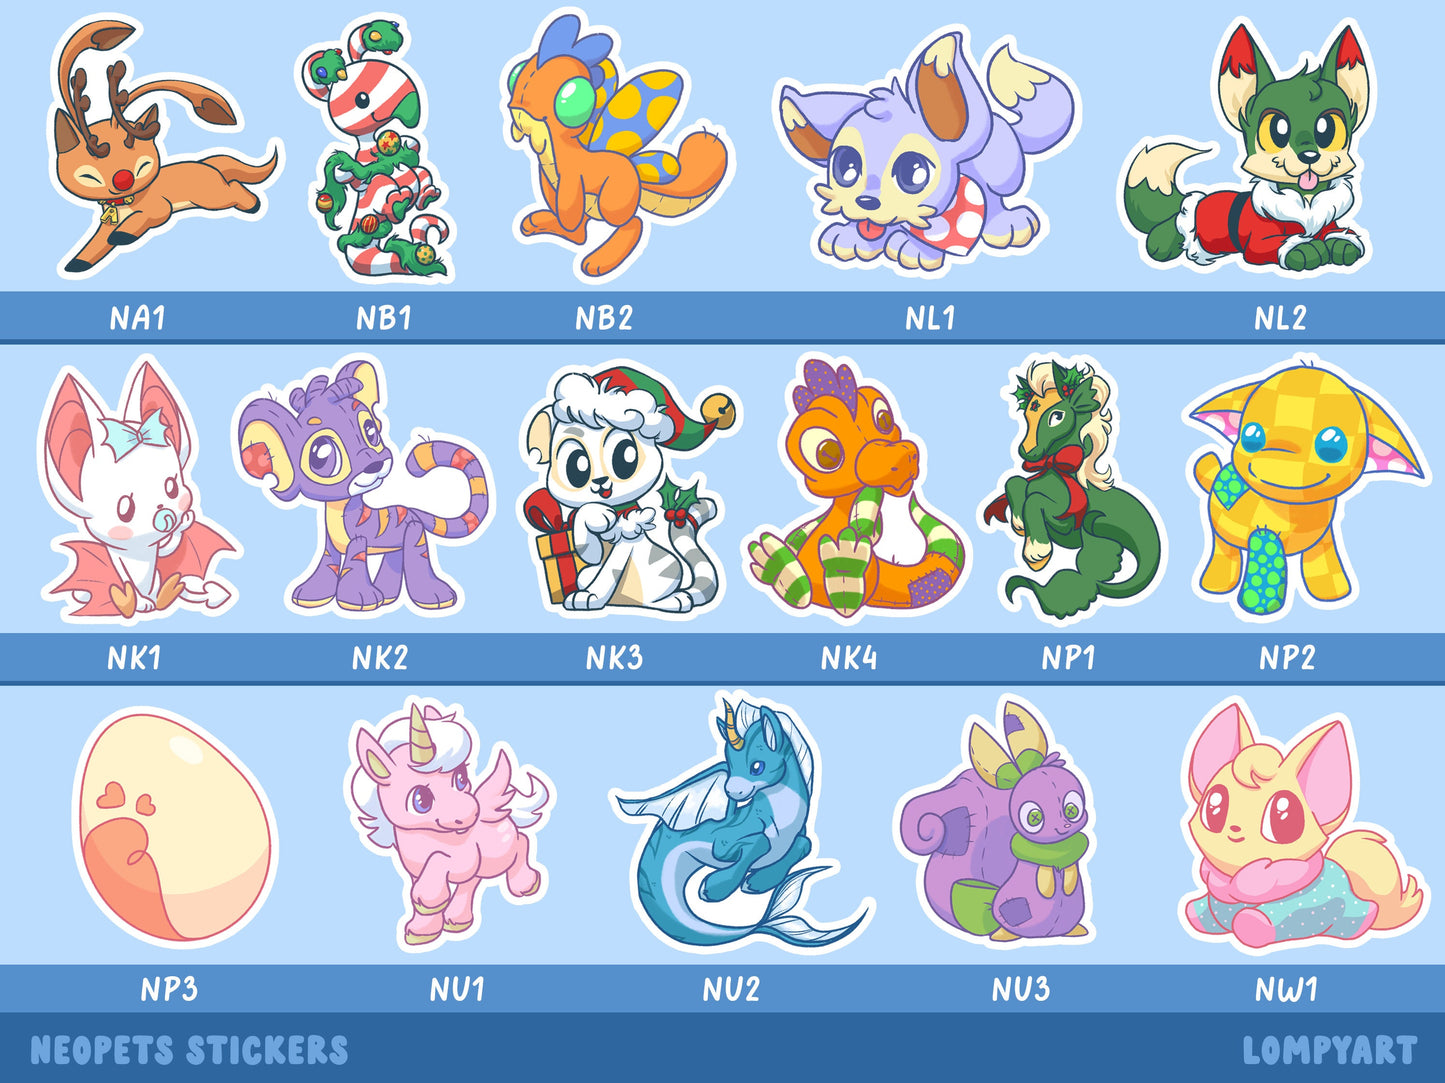 Neopets Stickers